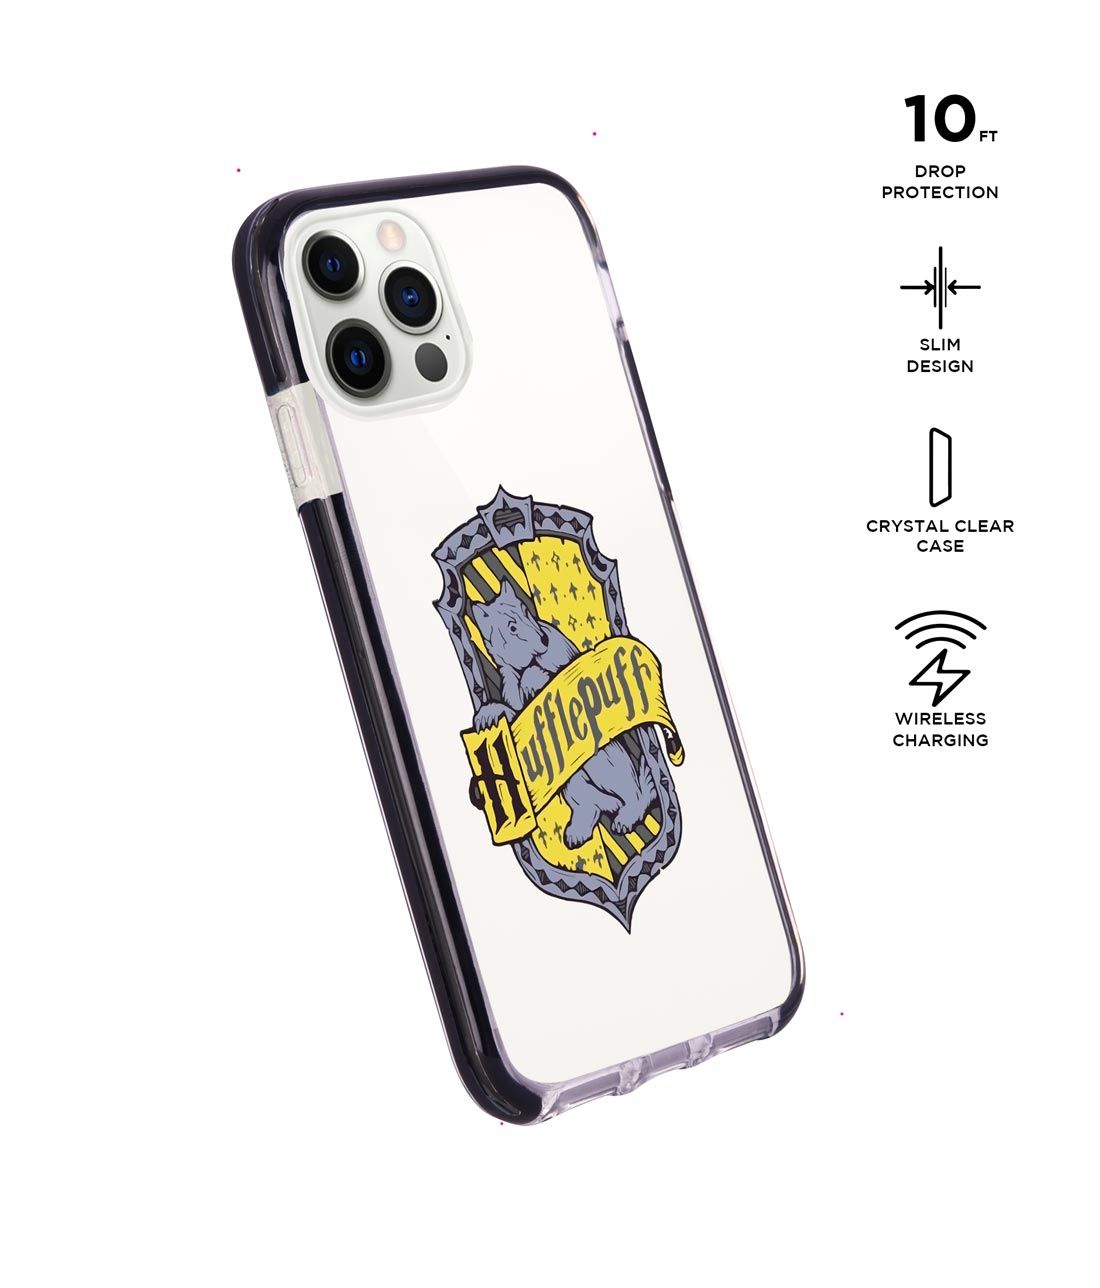 Crest Hufflepuff - Extreme Case for iPhone 12 Pro Max